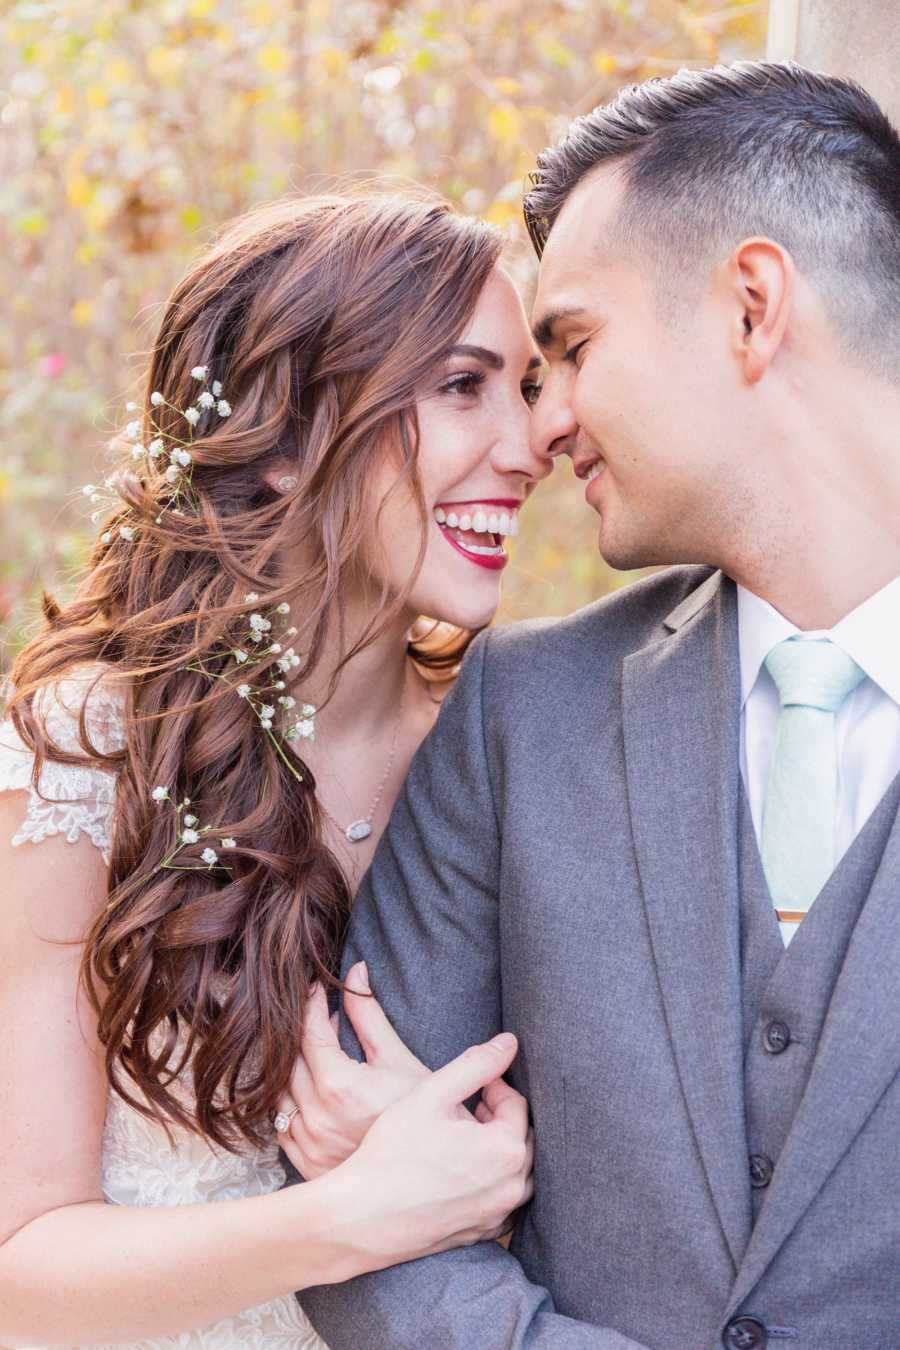 Bride holds onto groom's arm as she smiles looking into his eyes